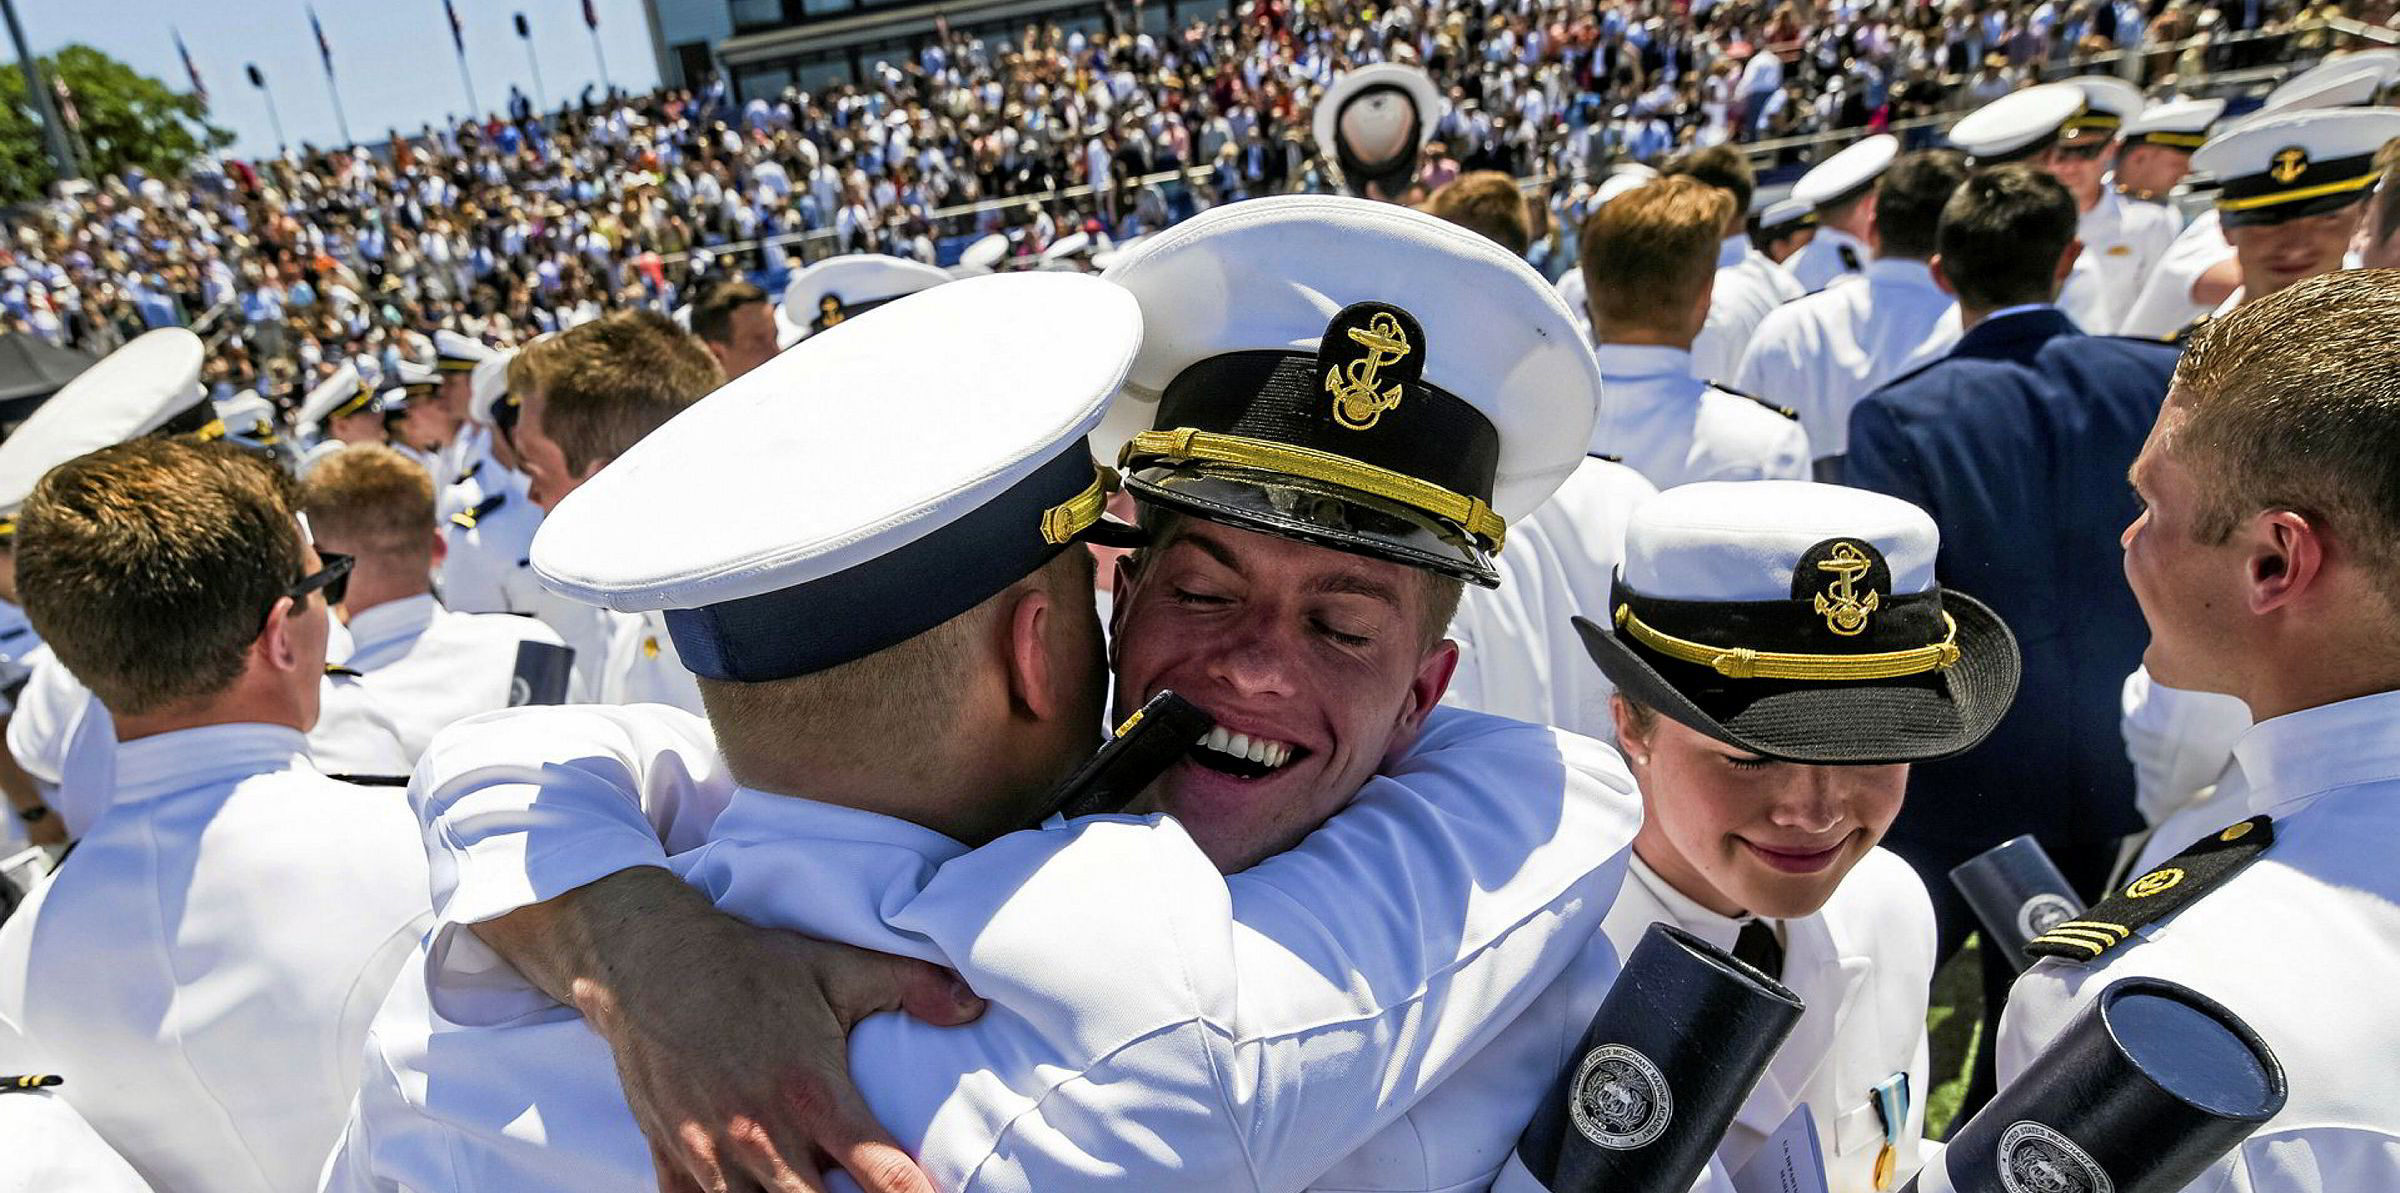 USMMA scandal Have lessons been learnt from academy’s toughest test